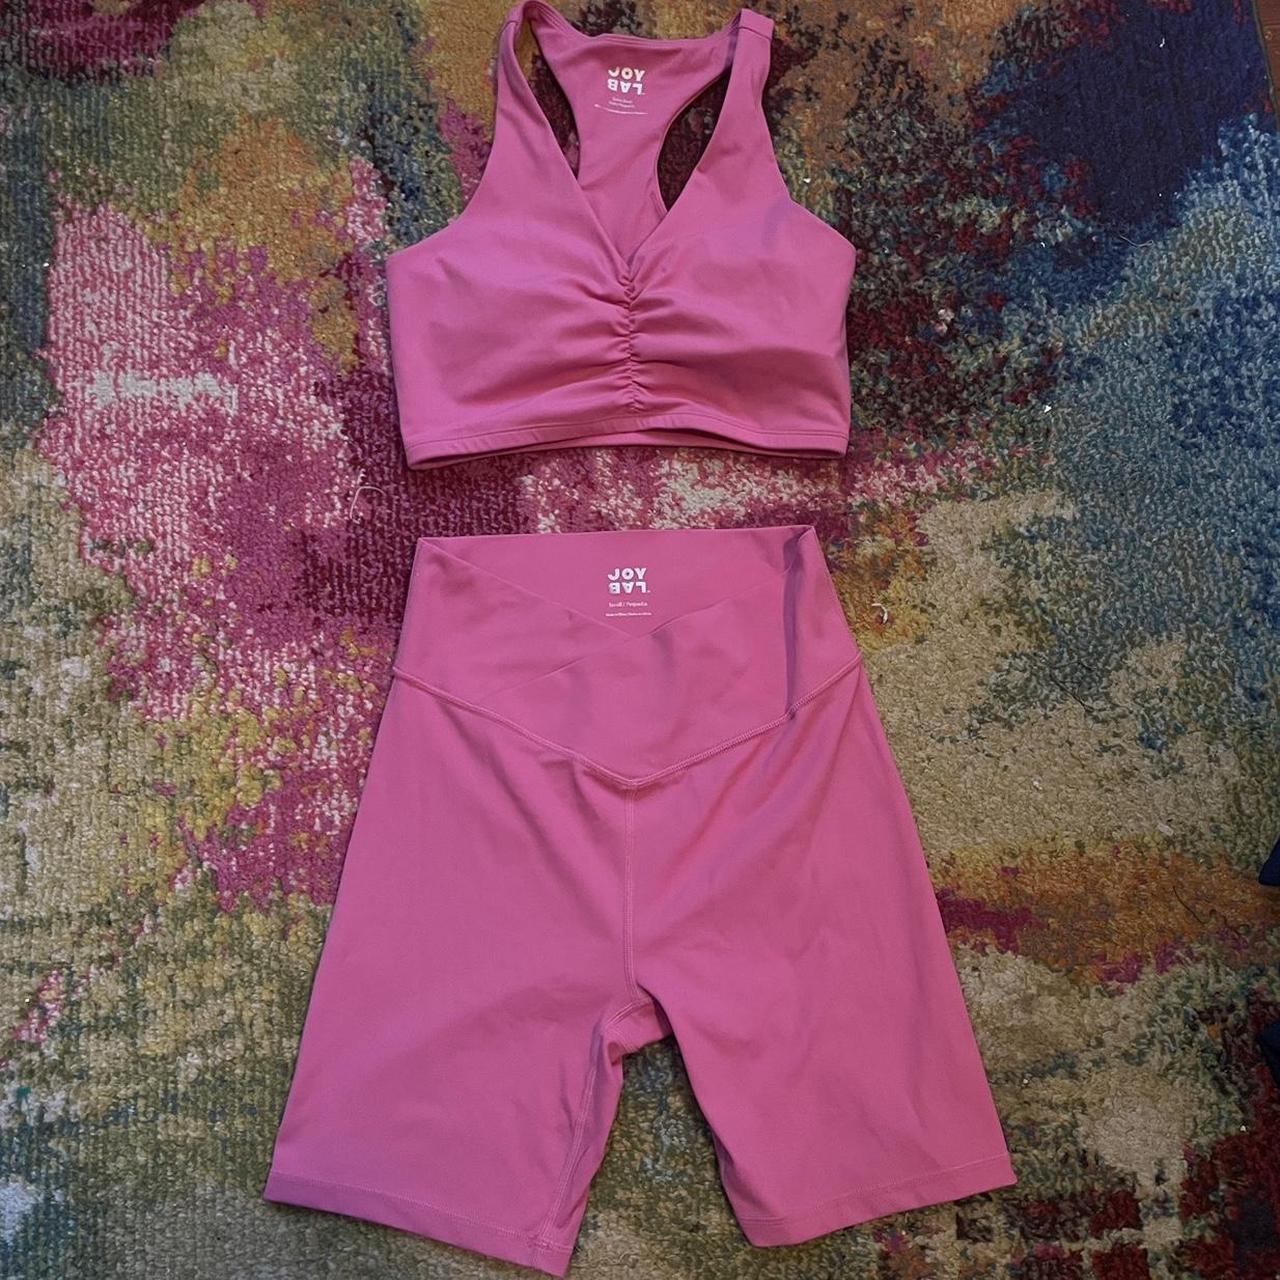 Pink ultimate leggings with matching sports bra.